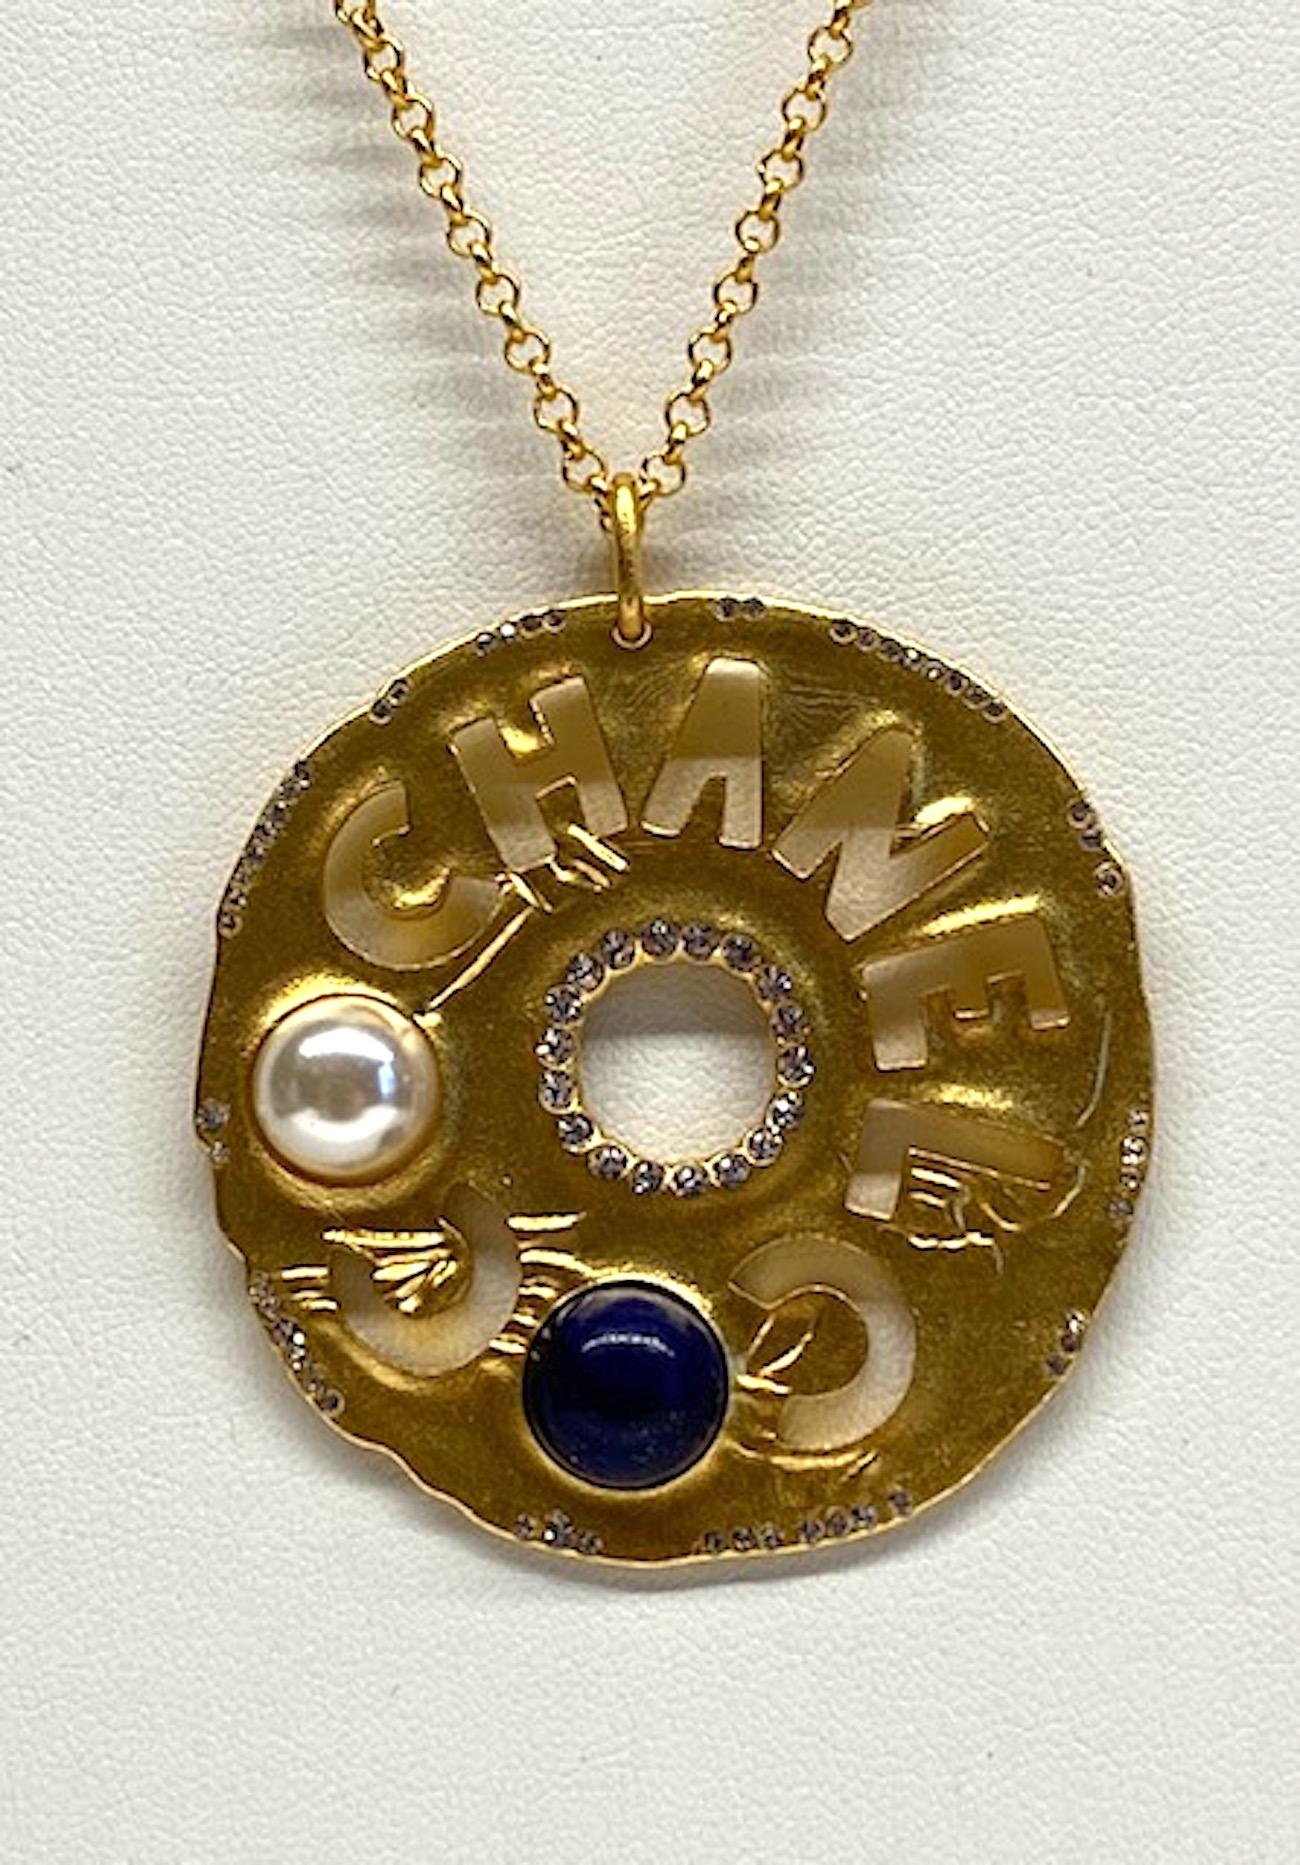 Women's Chanel Cut Out Disk Pendant Necklace, 2019 Cruise Collection